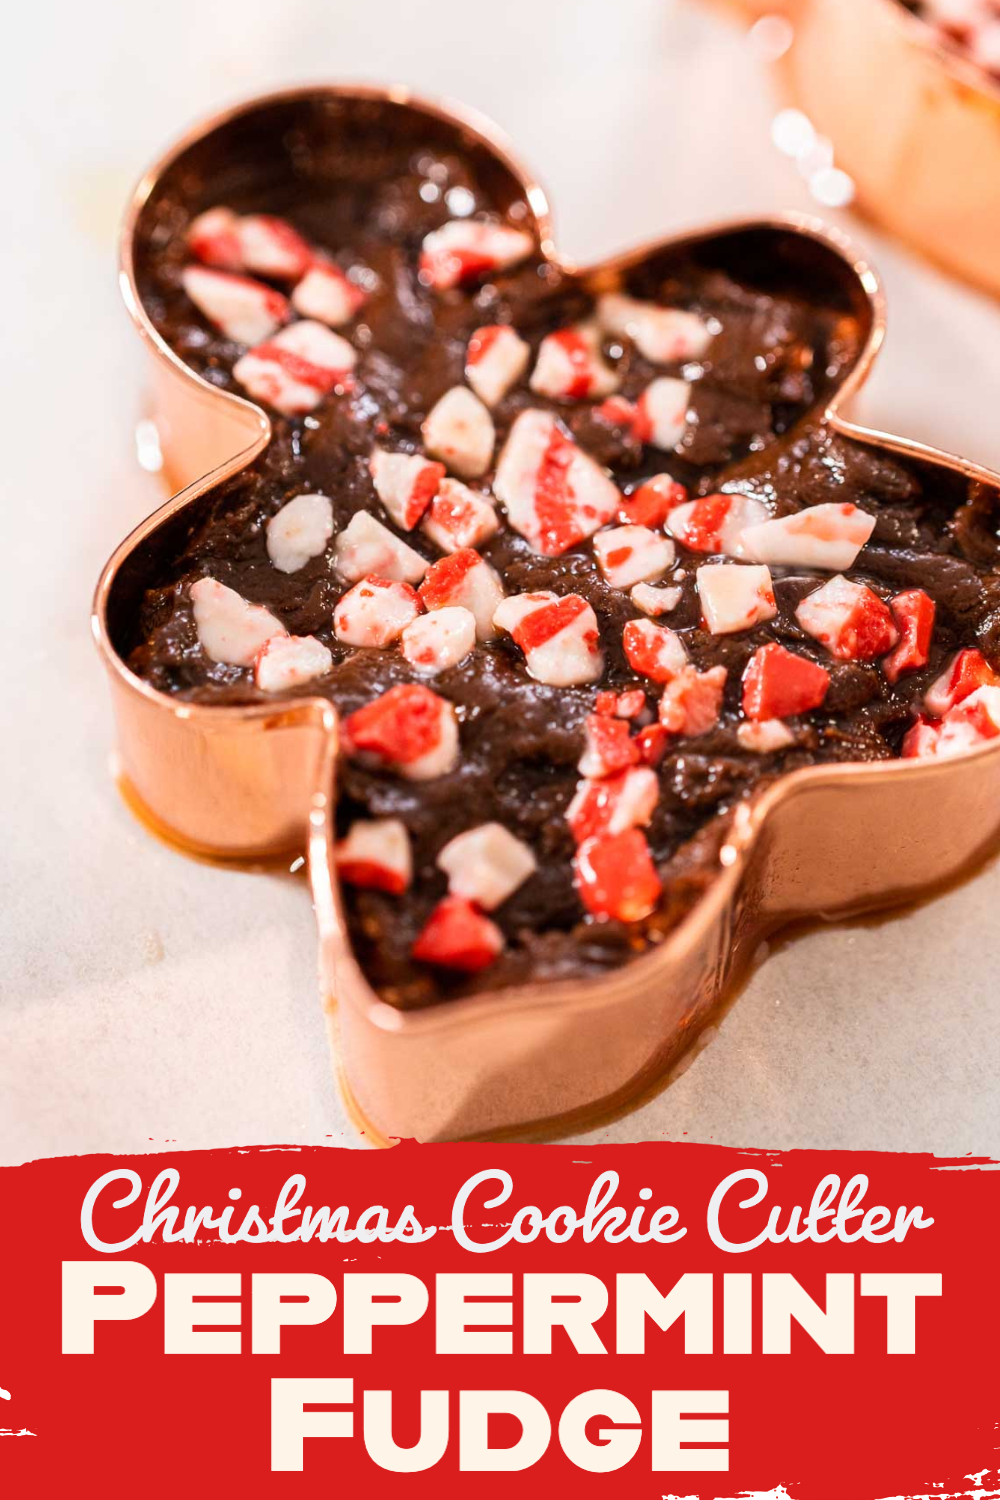 Christmas Cookie Cutter Peppermint Fudge